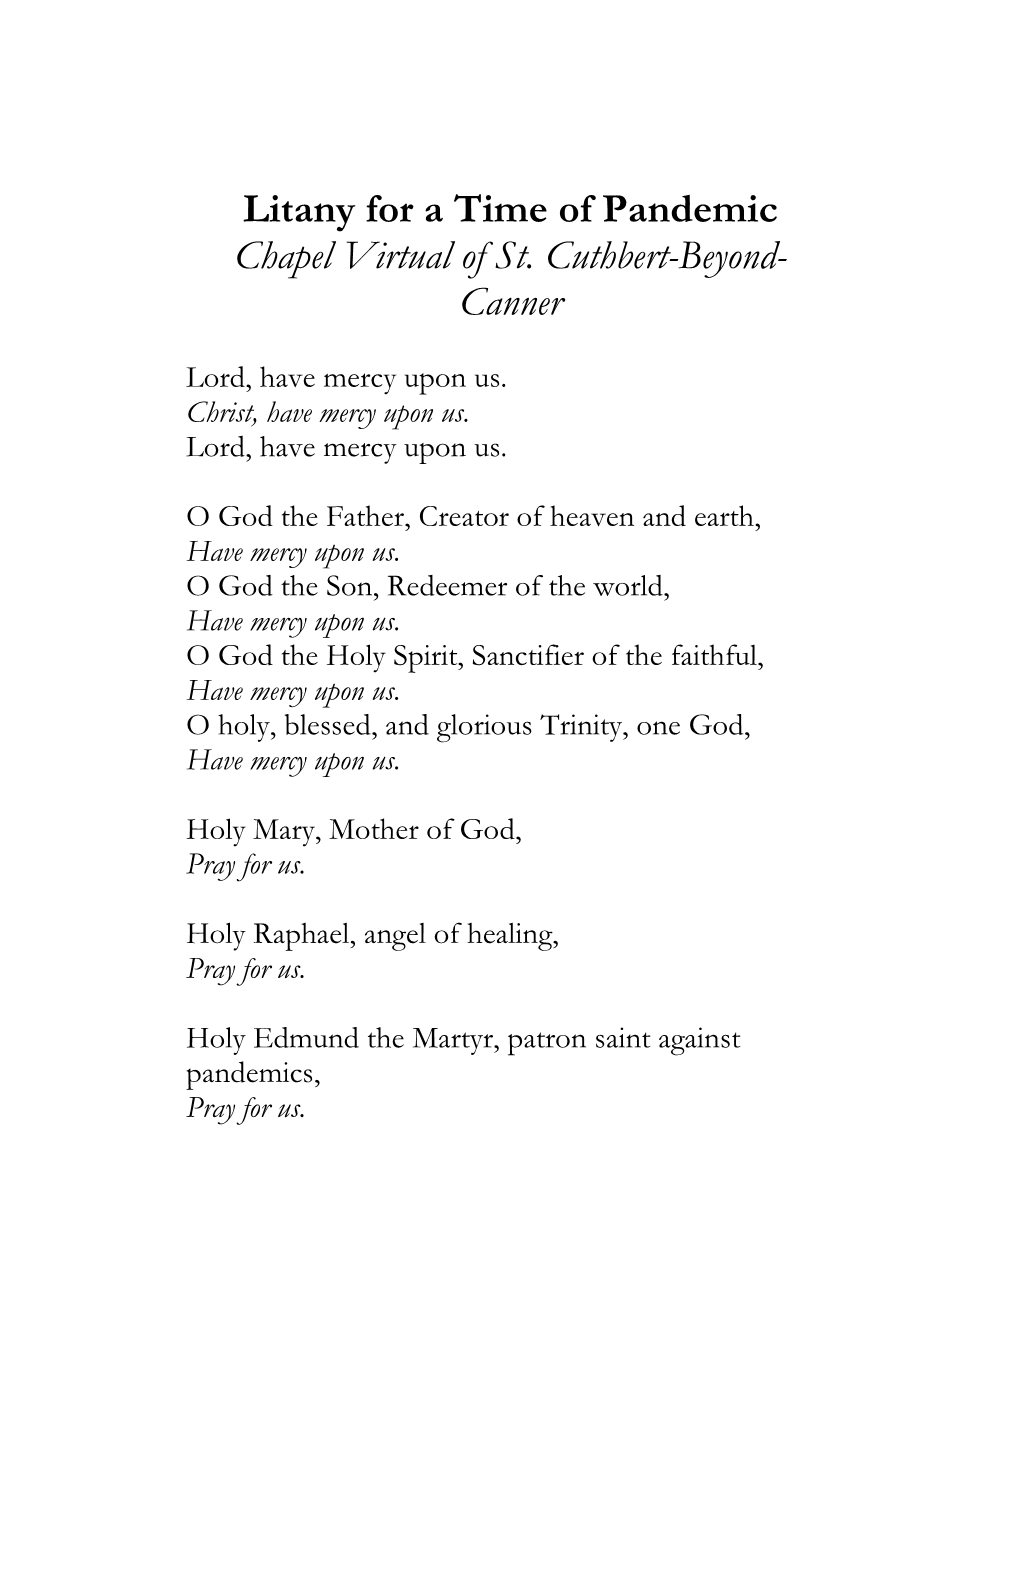 Litany for a Time of Pandemic Chapel Virtual of St. Cuthbert-Beyond- Canner